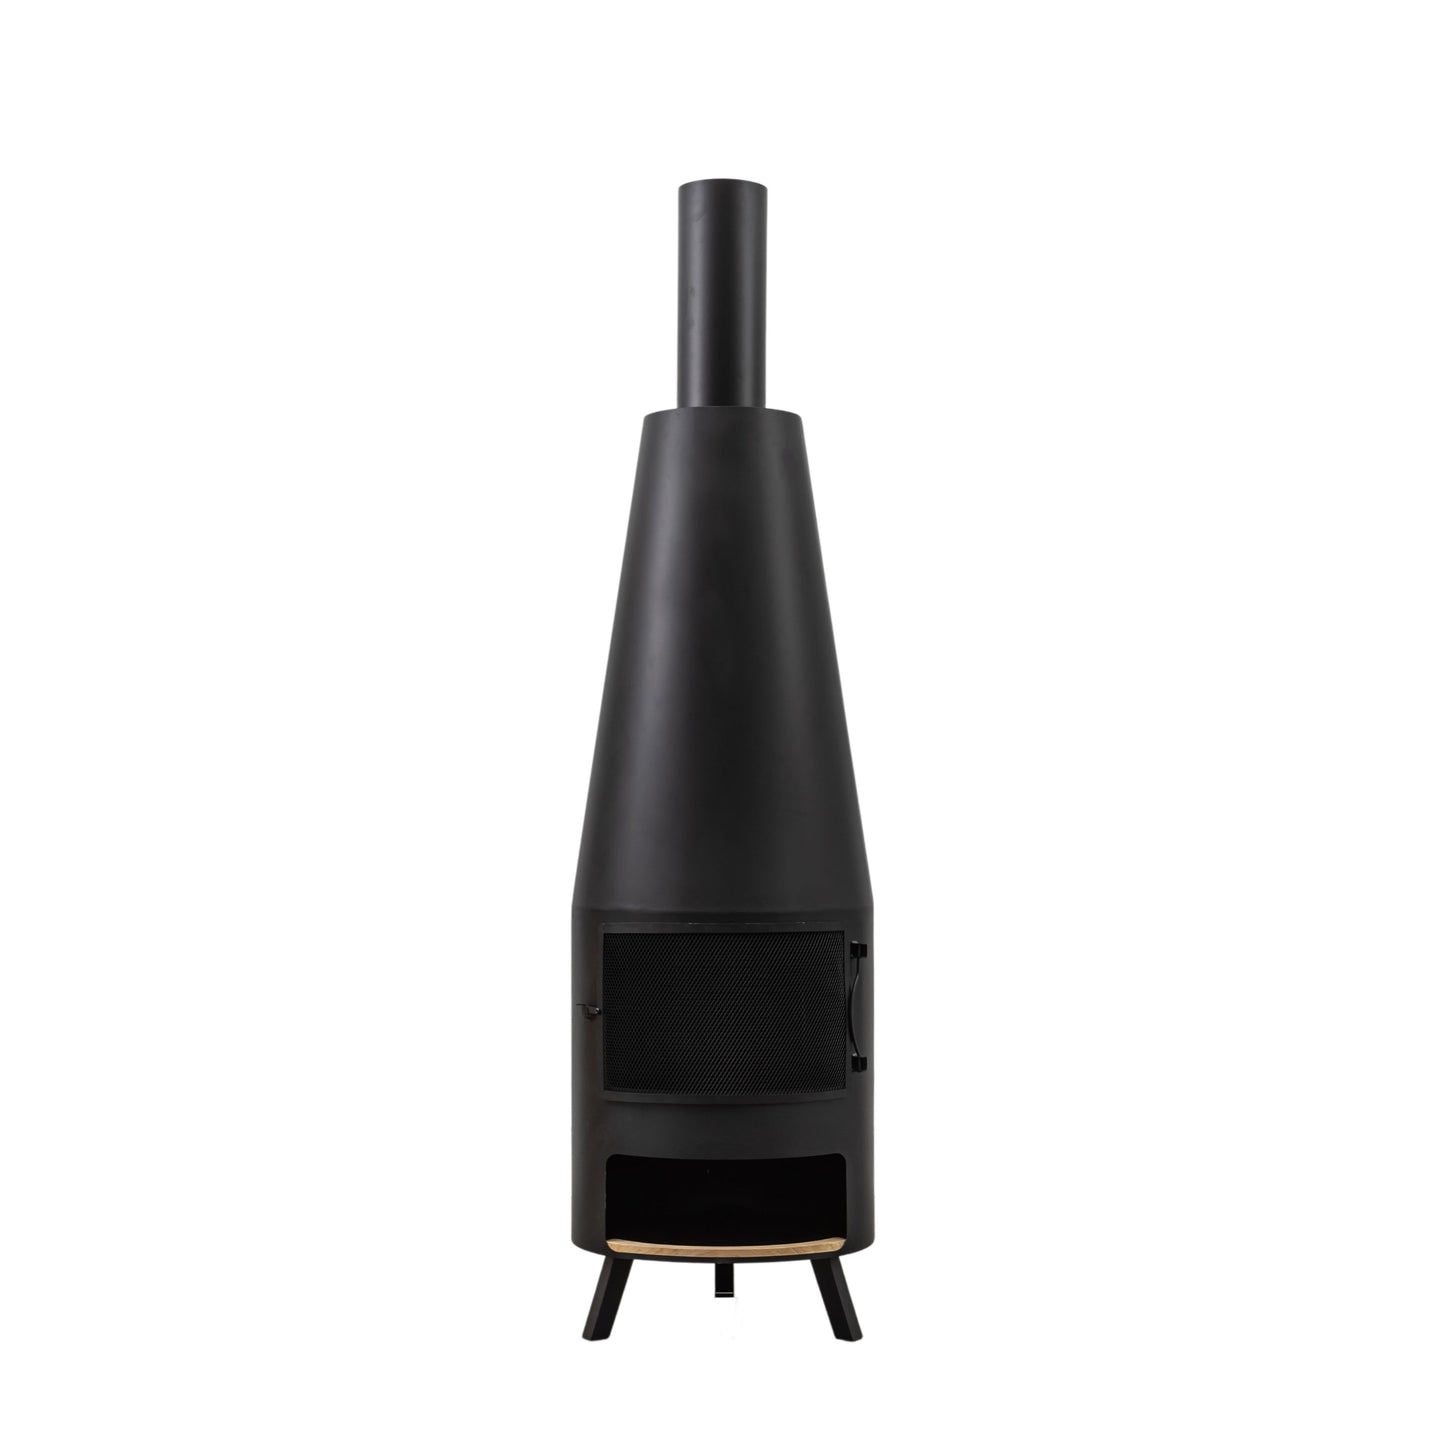 Load image into Gallery viewer, A Monkleigh Chiminea with Pizza Shelf 500x500x1865mm for interior decor purposes from Kikiathome.co.uk on a white background.
